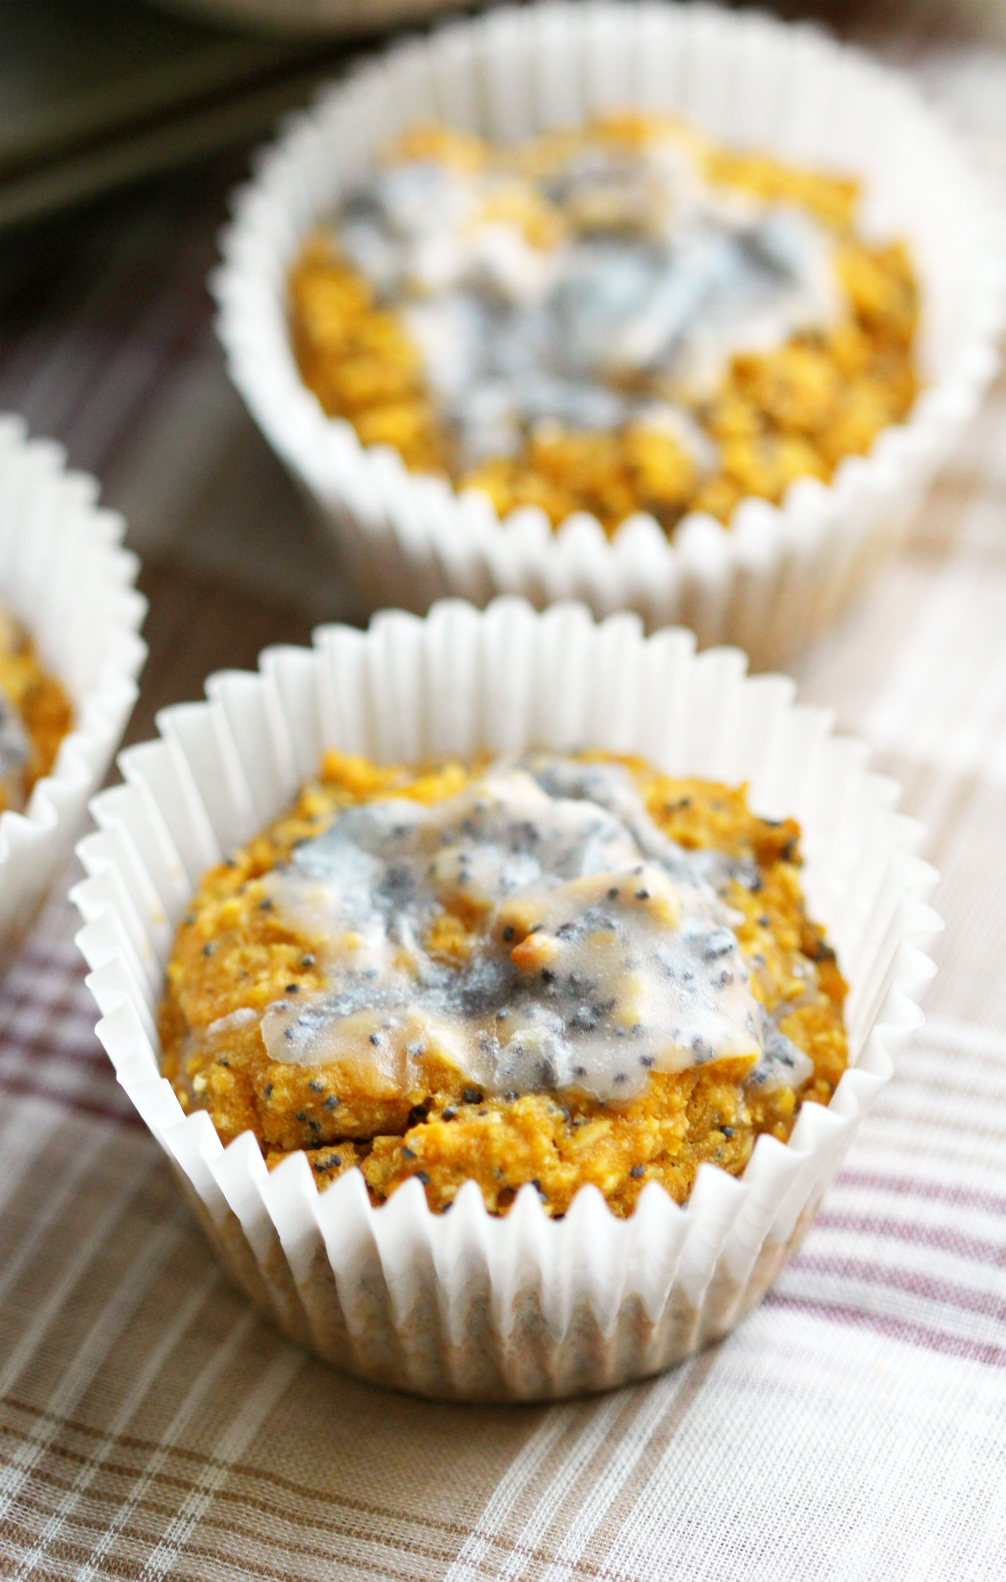 Lively Lemon Poppy Seed Muffins | Strength and Sunshine @RebeccaGF666 It's always springtime with these vibrant, healthy, lively lemon poppy seed muffins! A fun, veggie-packed, gluten-free, vegan breakfast or snack recipe that will leave you feeling happy and bright!